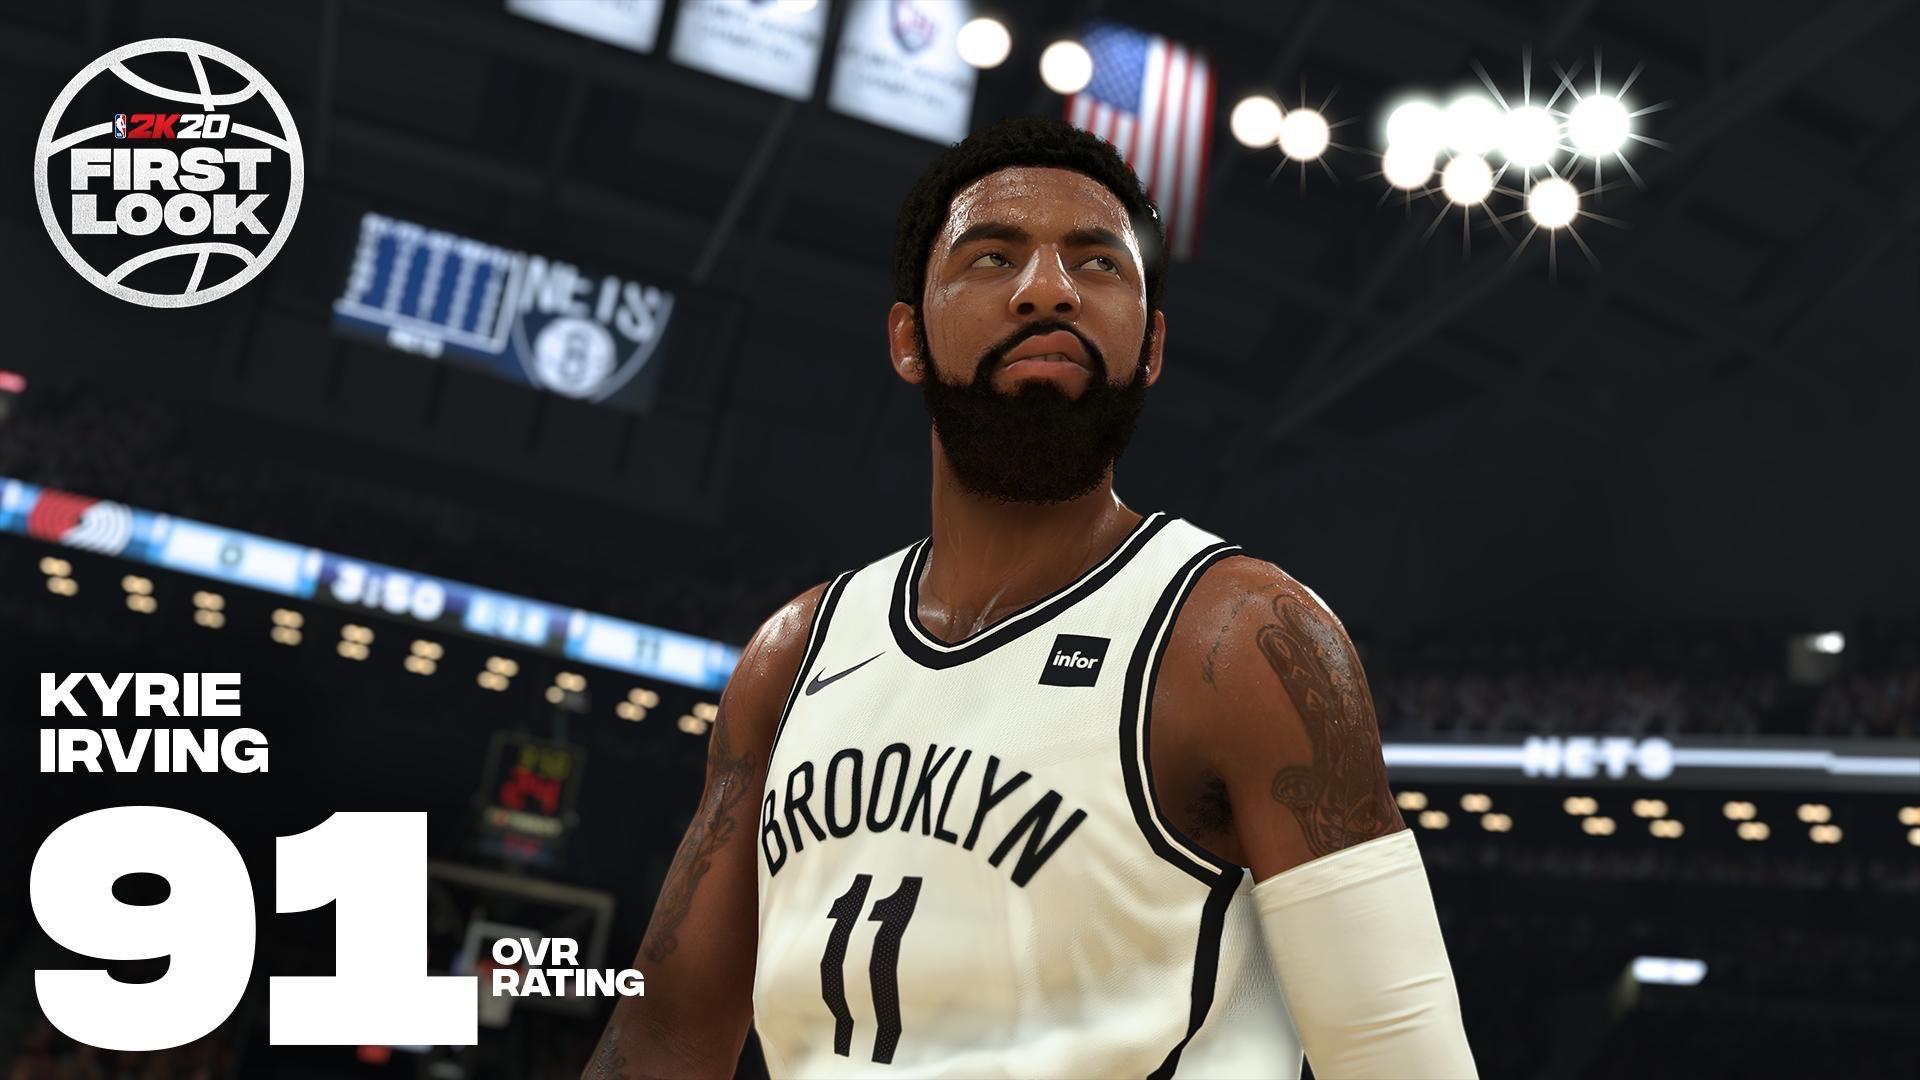 Kyrie Irving NBA 2K20 Rating (Current Brooklyn Nets)